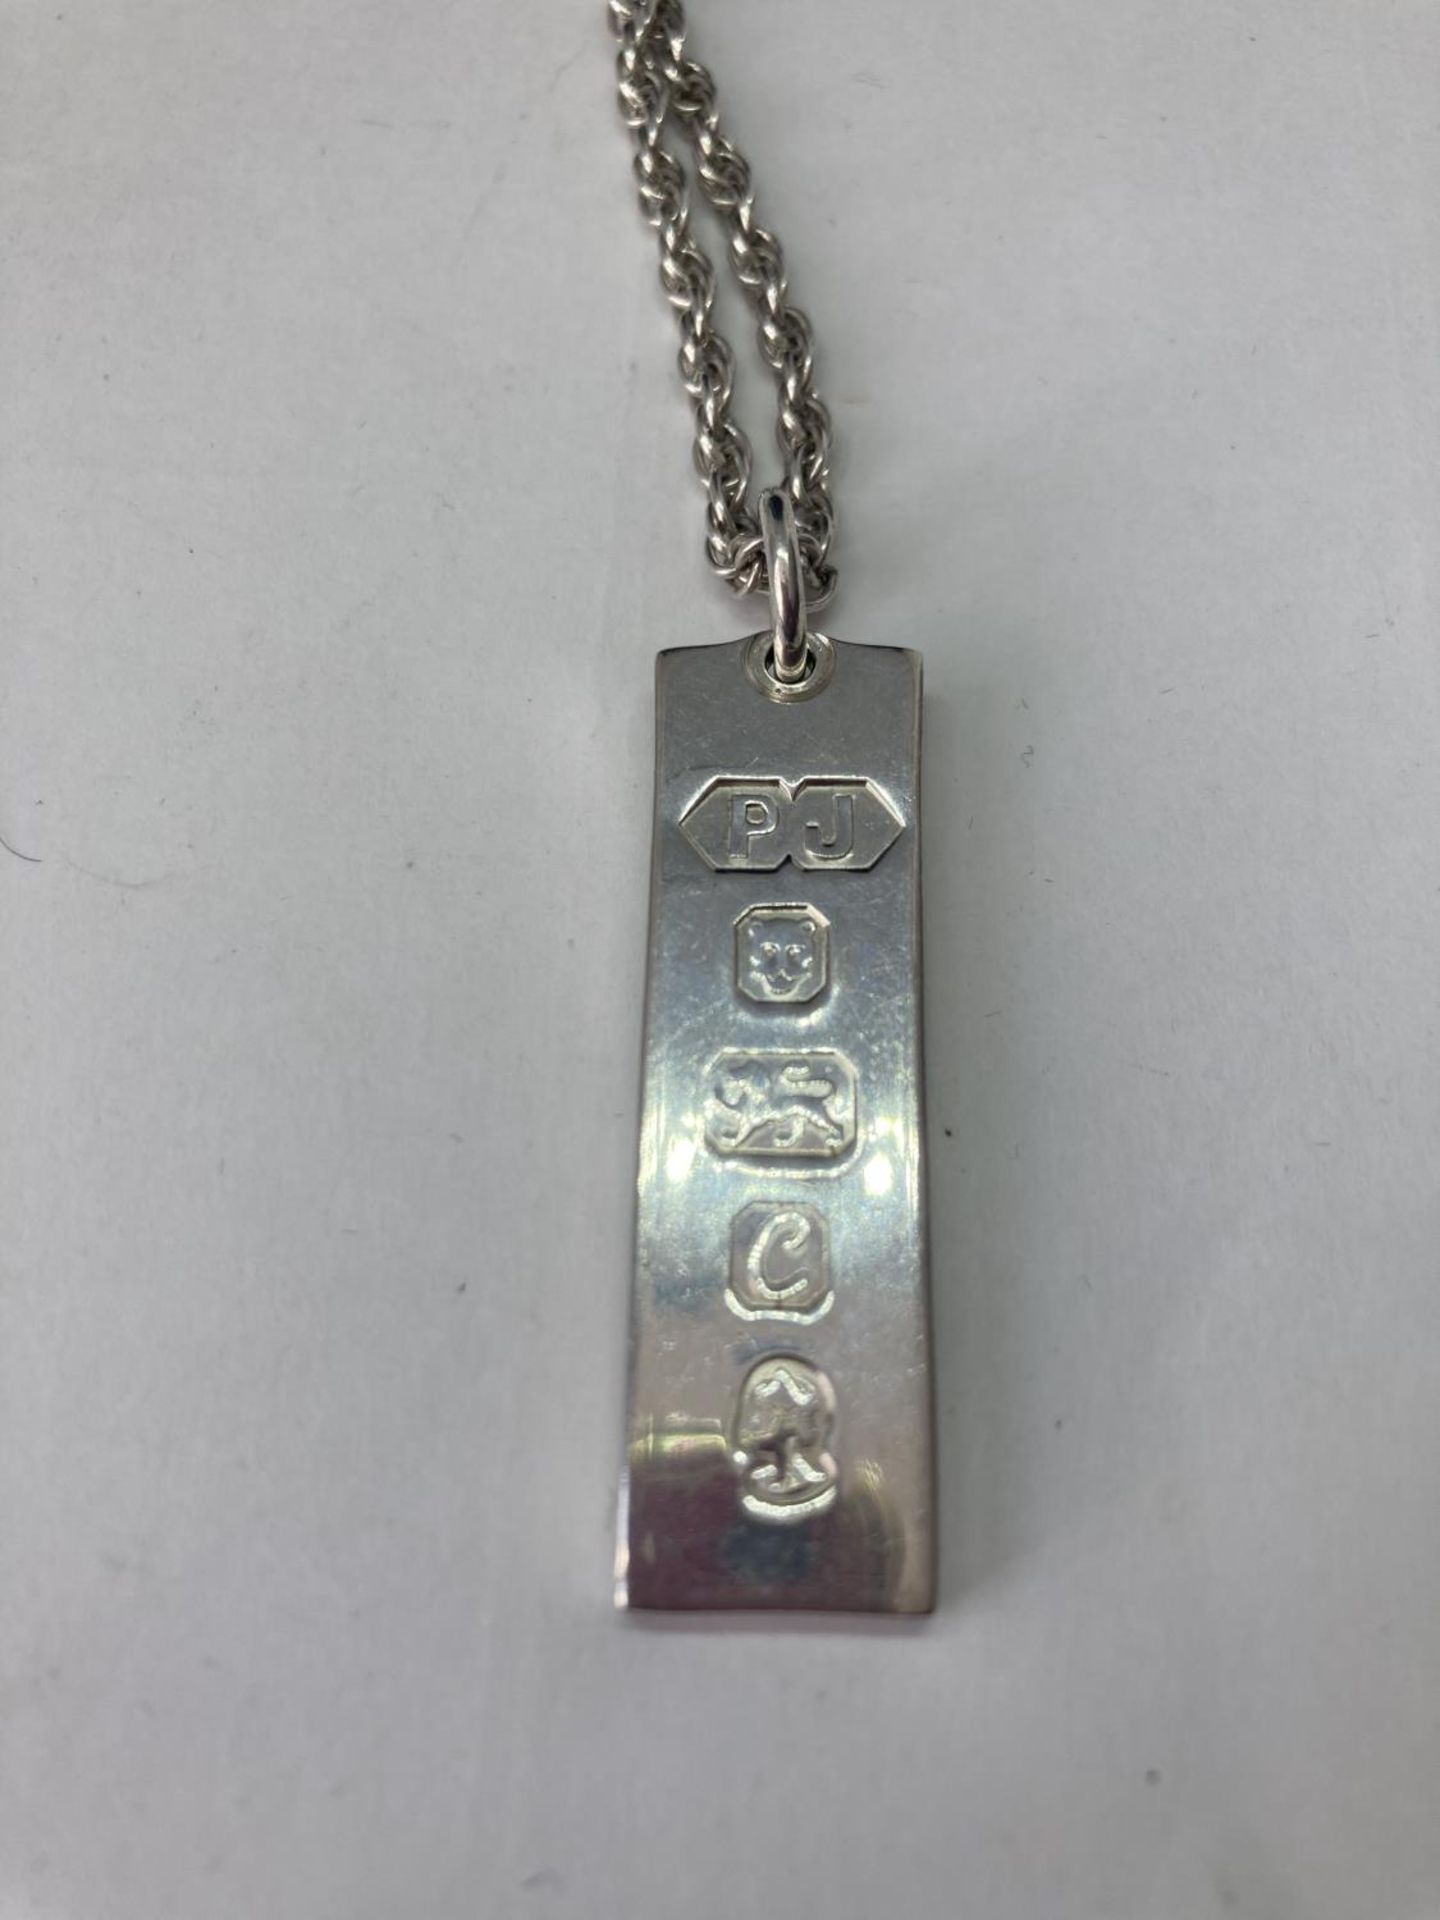 TWO SILVER NECKLACES WITH SILVER INGOT PENDANTS - Image 8 of 8